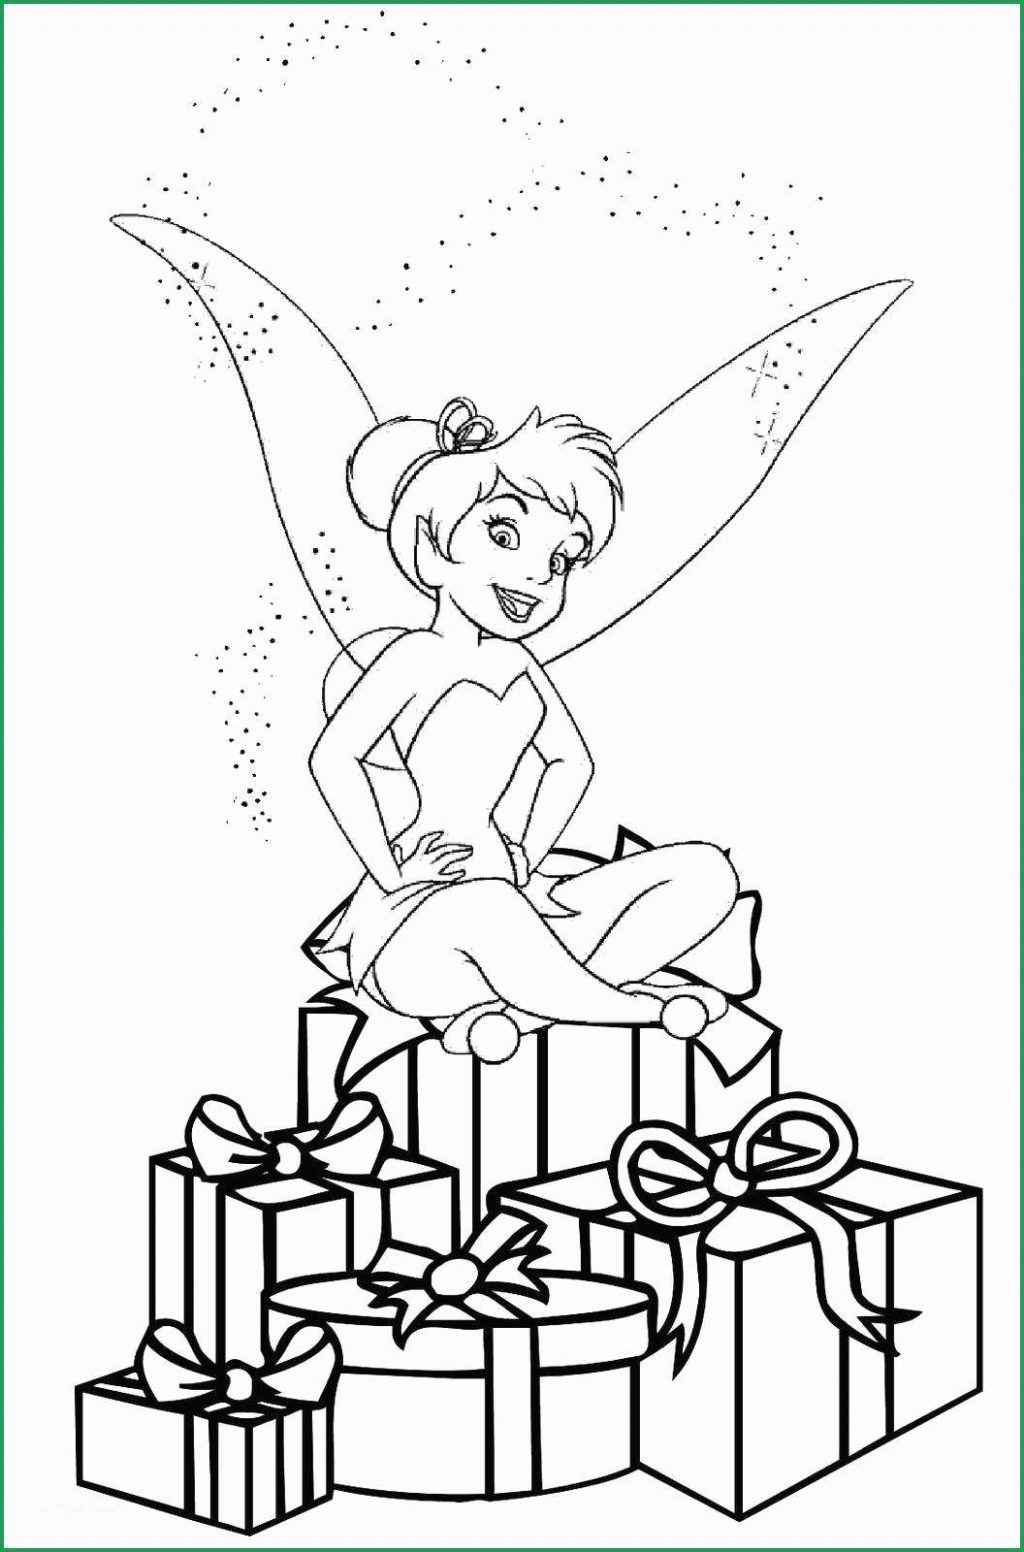 Coloring Ideas : Tinkerbell Coloring Pages Christmas Online - Tinkerbell Coloring Pages Printable Free